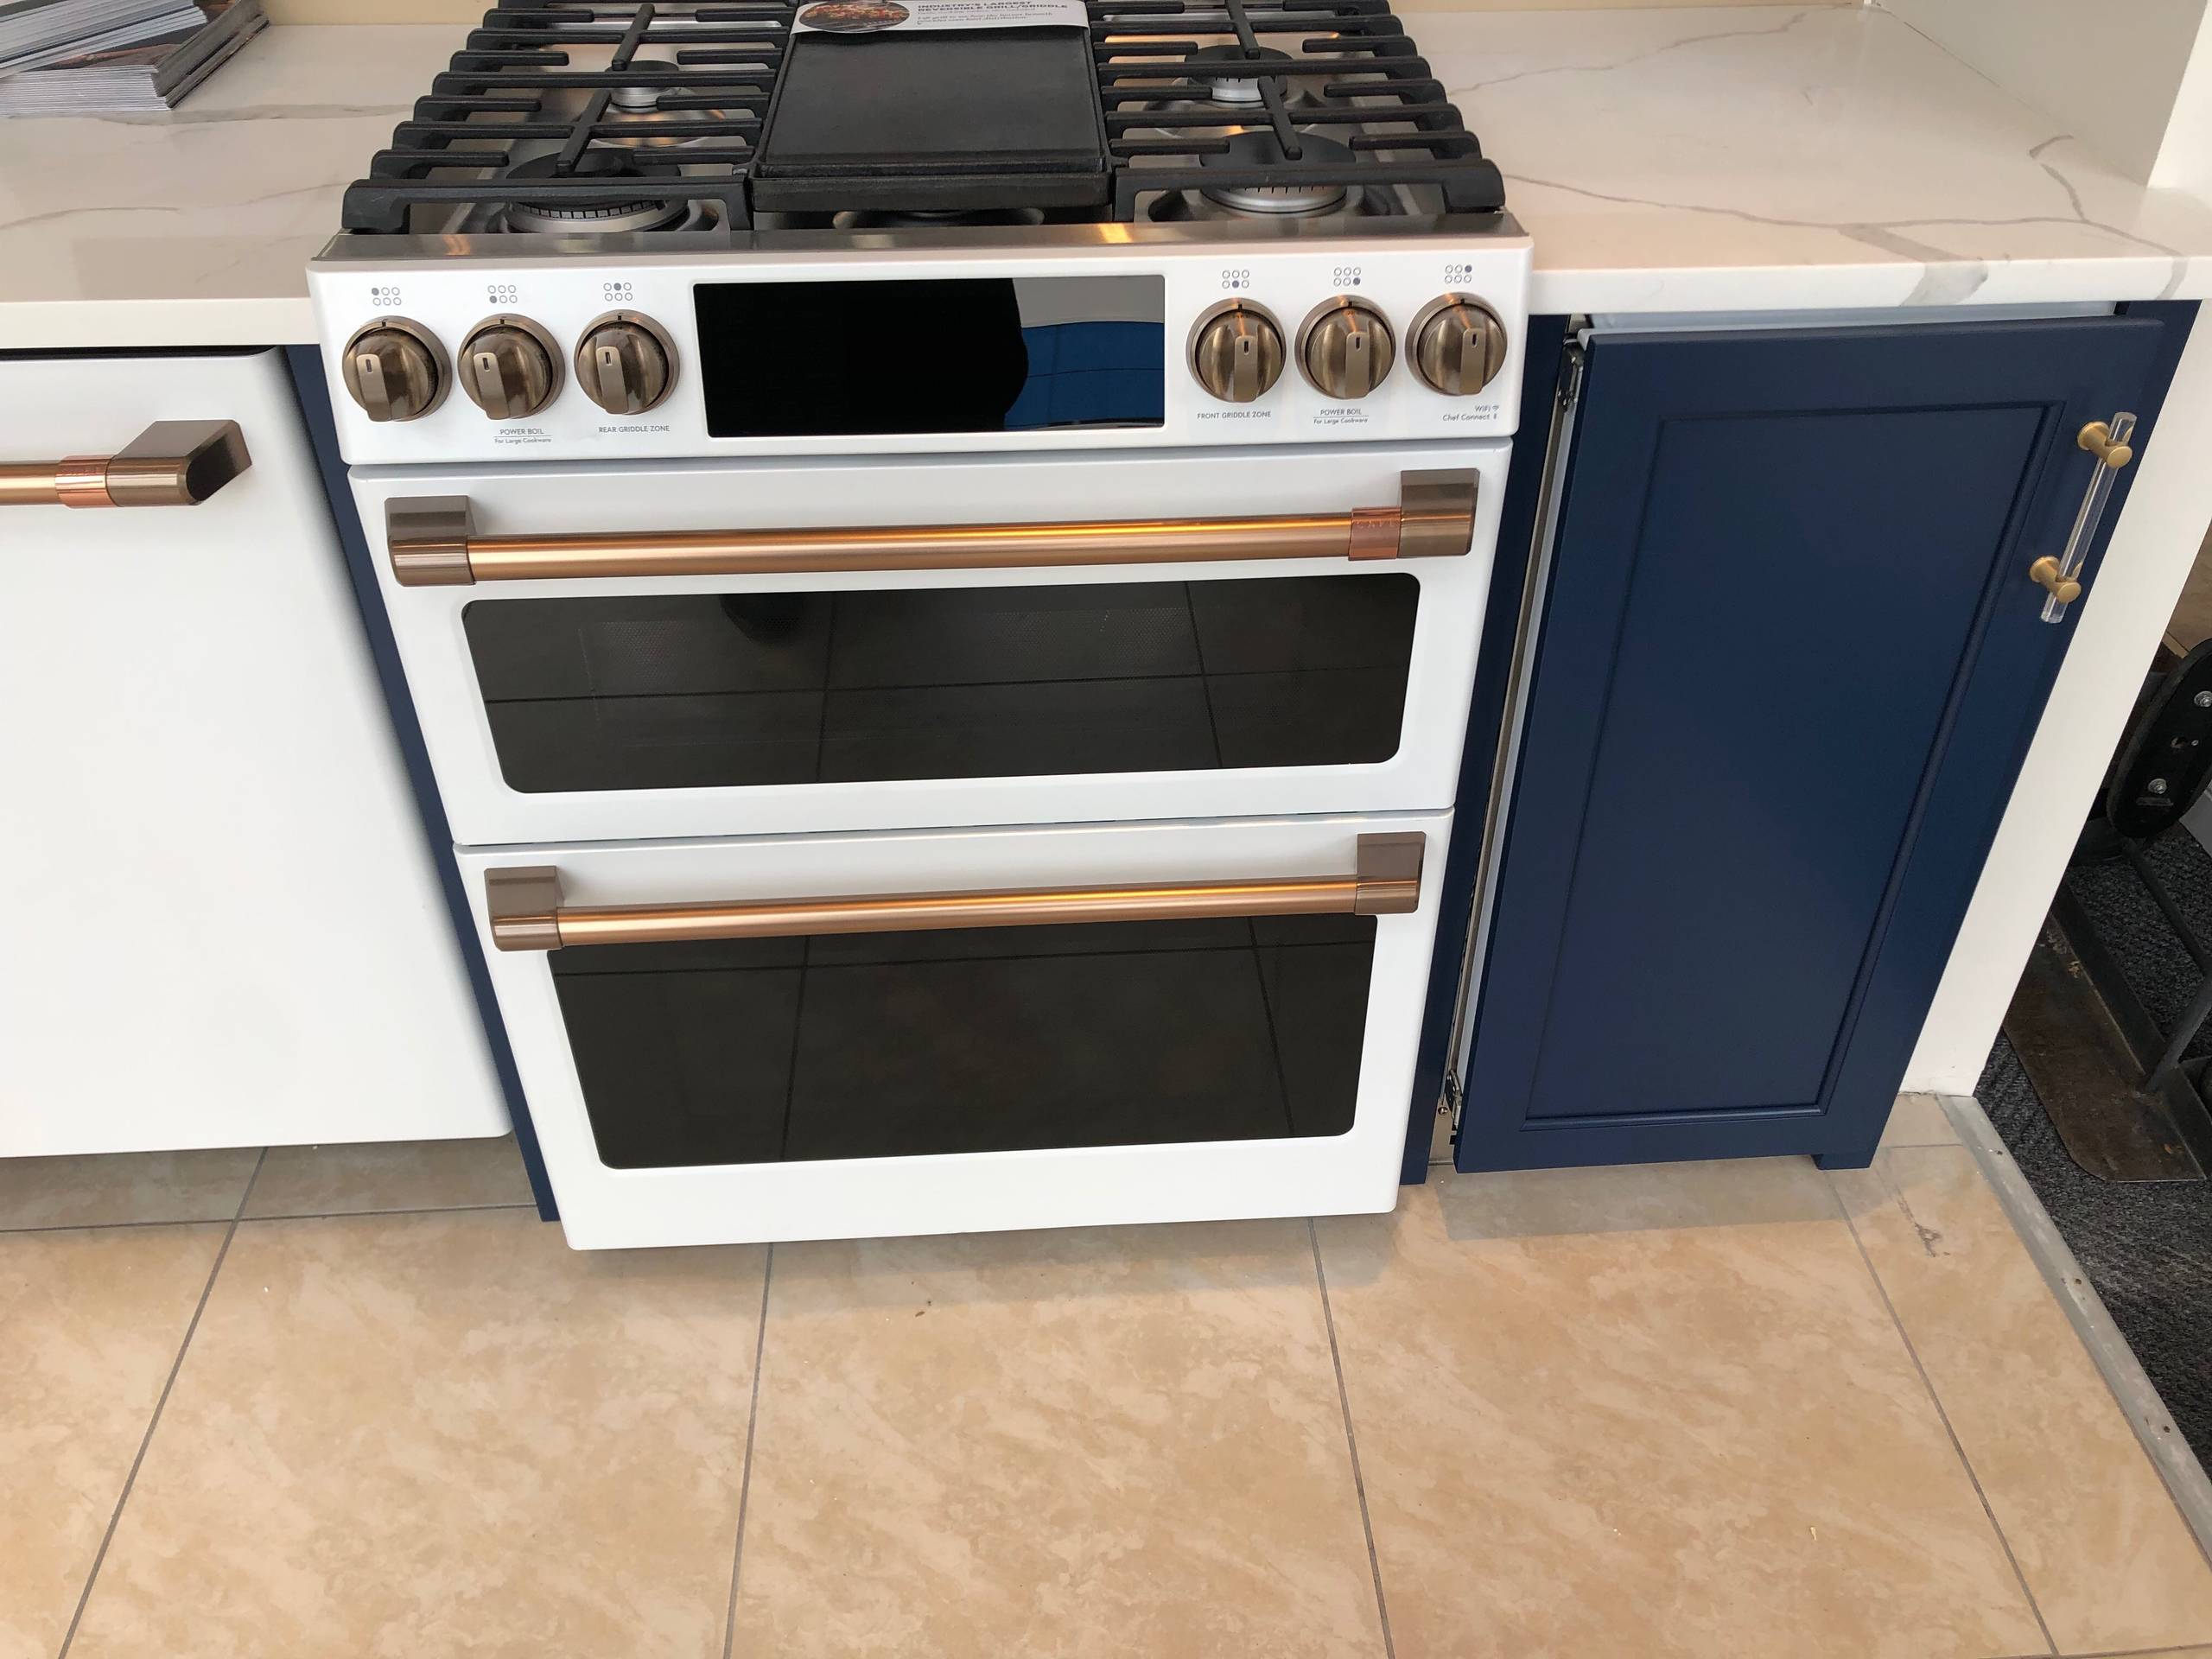 https://st.hzcdn.com/simgs/pictures/kitchens/ge-cafe-gerhard-s-appliances-img~43a10c440c2cd7ee_14-2100-1-d4bc90e.jpg